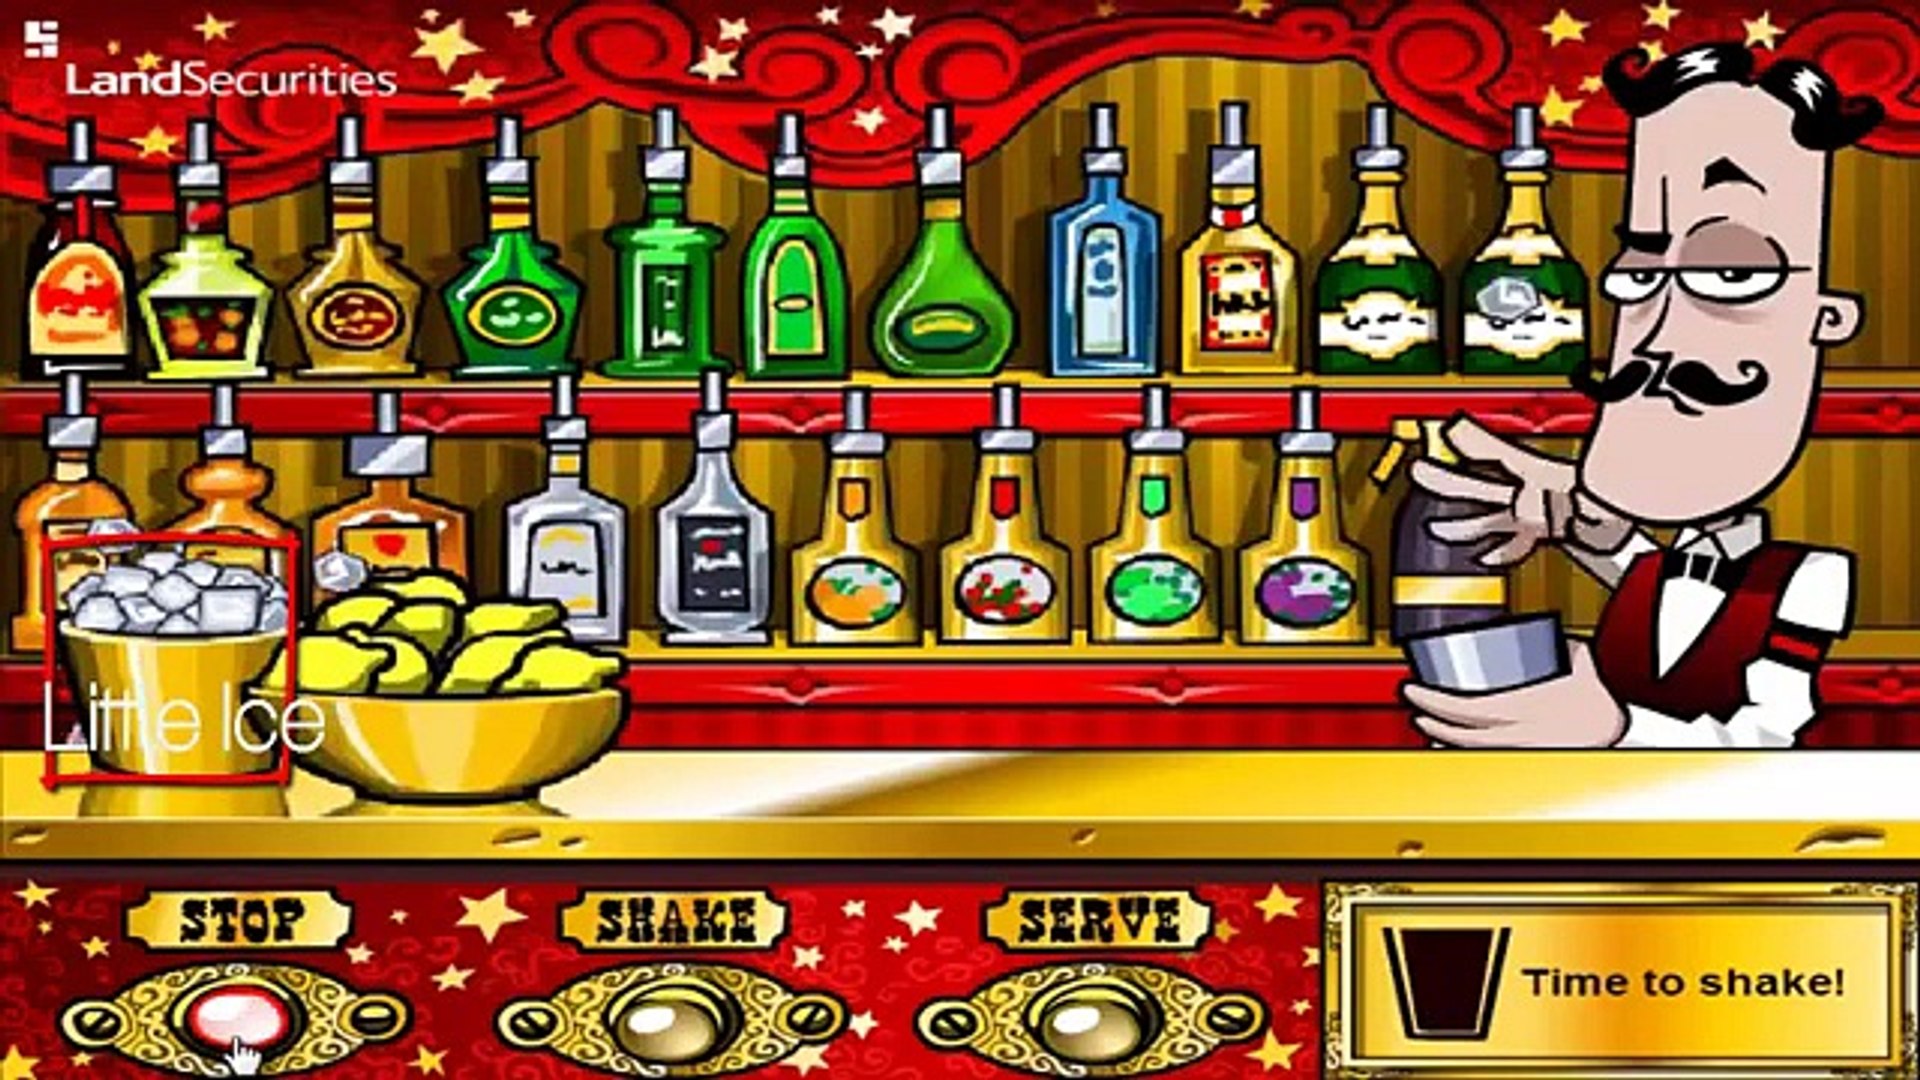 Y8.com games- Bartender: The Right MixTHE RIGHT MIX - video Dailymotion